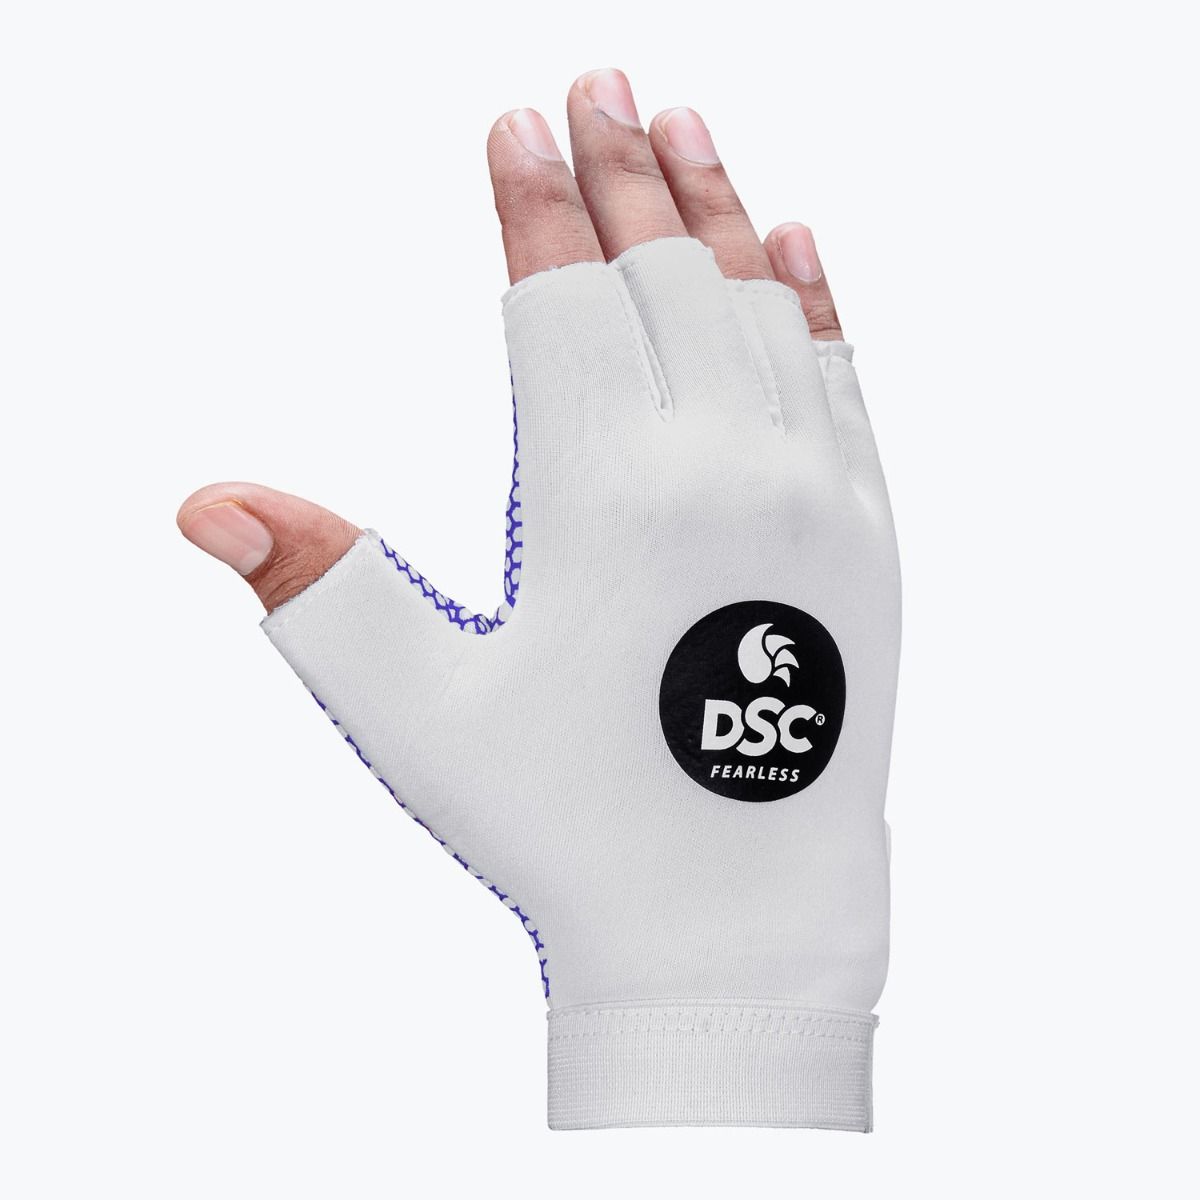 Buy Dirty Rigger Glove Guard Clip Online India